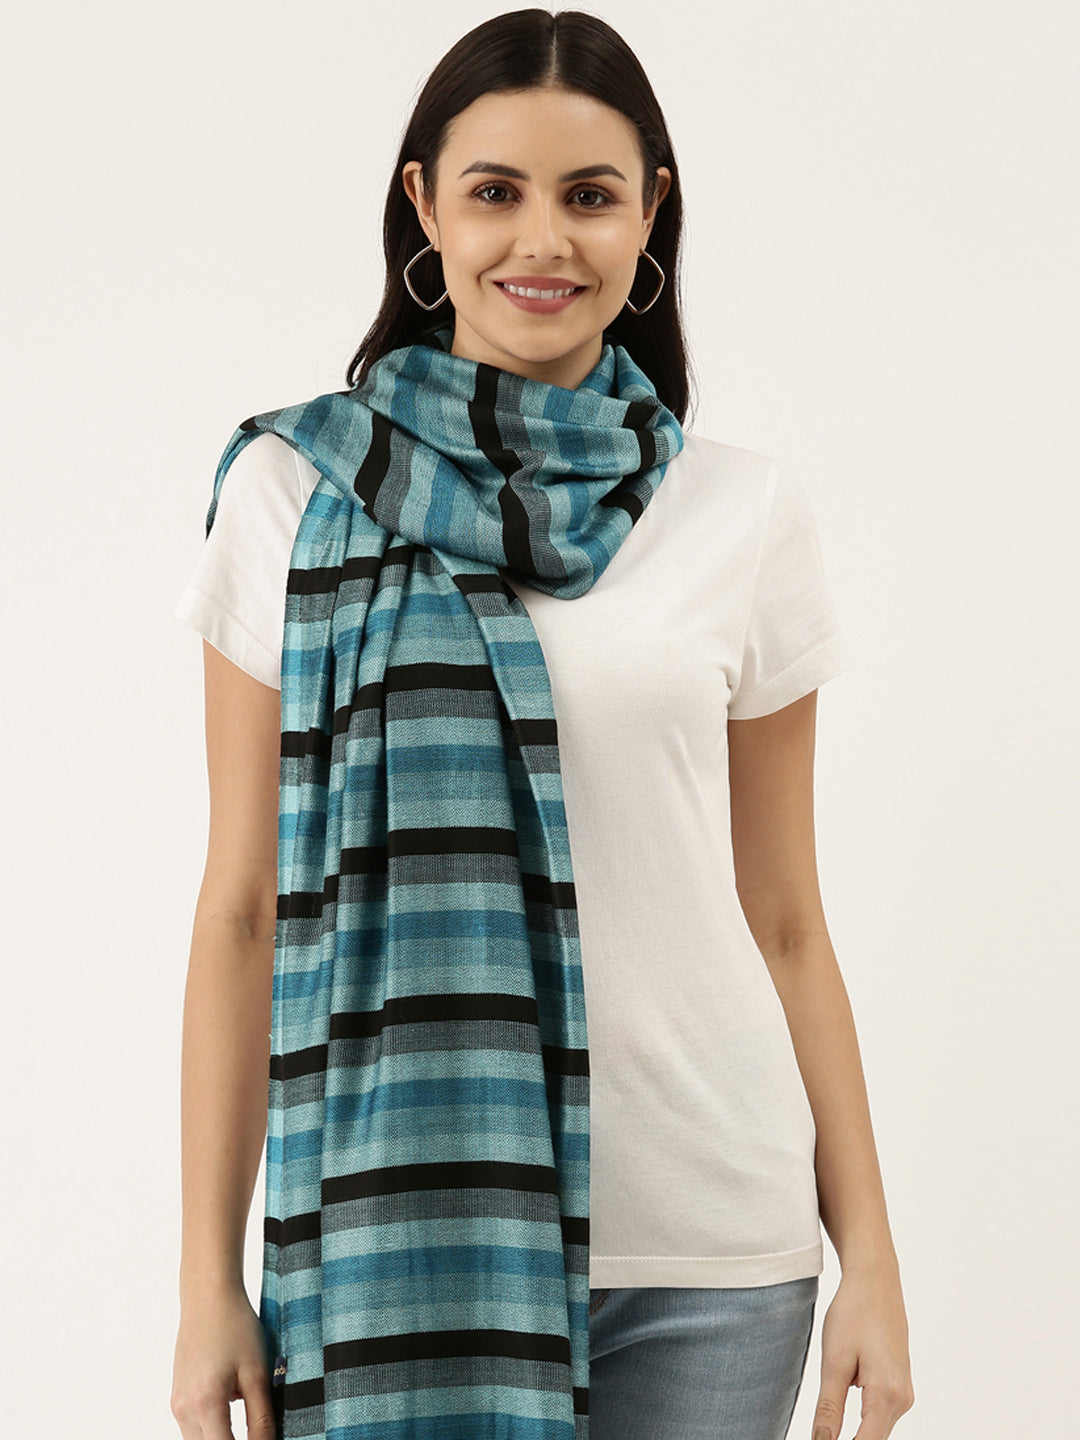 Women Checkered Stole, Scarf, Wrap (Size 28x80 Inches)